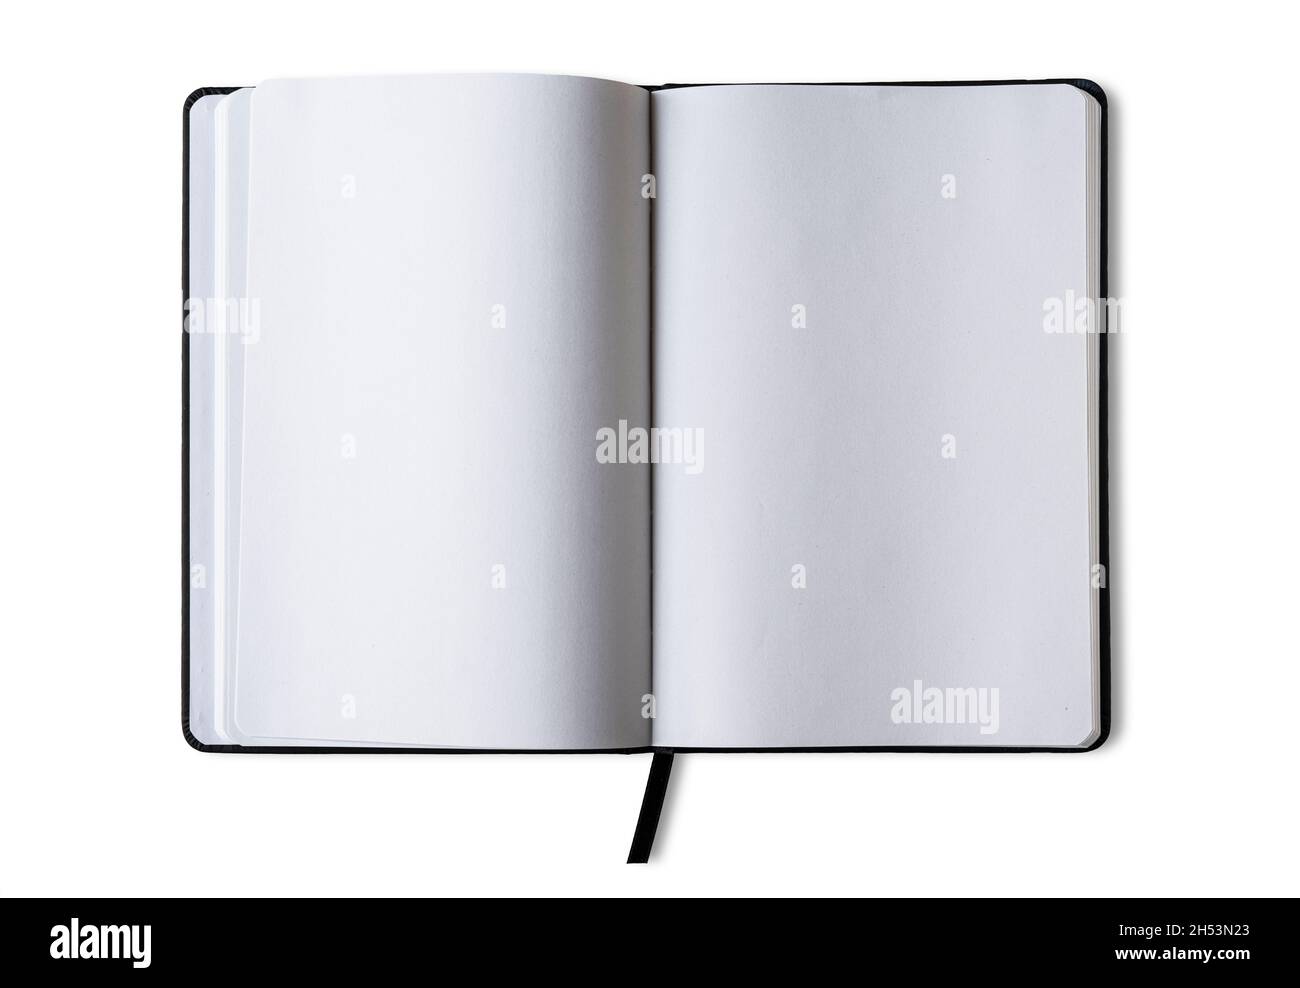 Notebook unfolded showing blank pages. Stock Photo